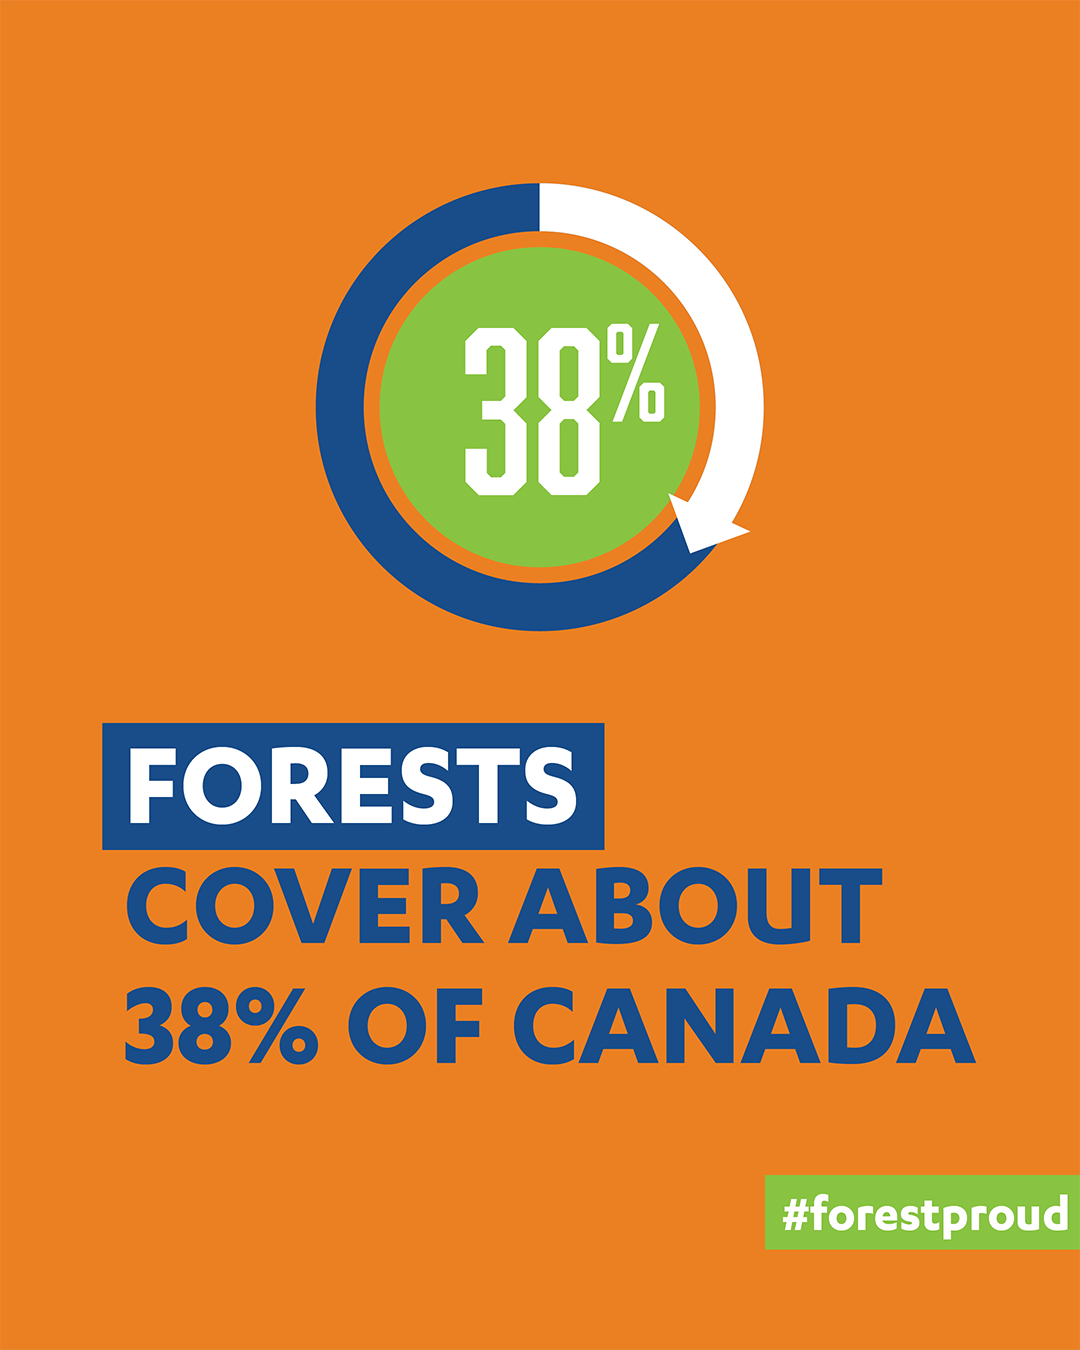 Forest Cover in Canada